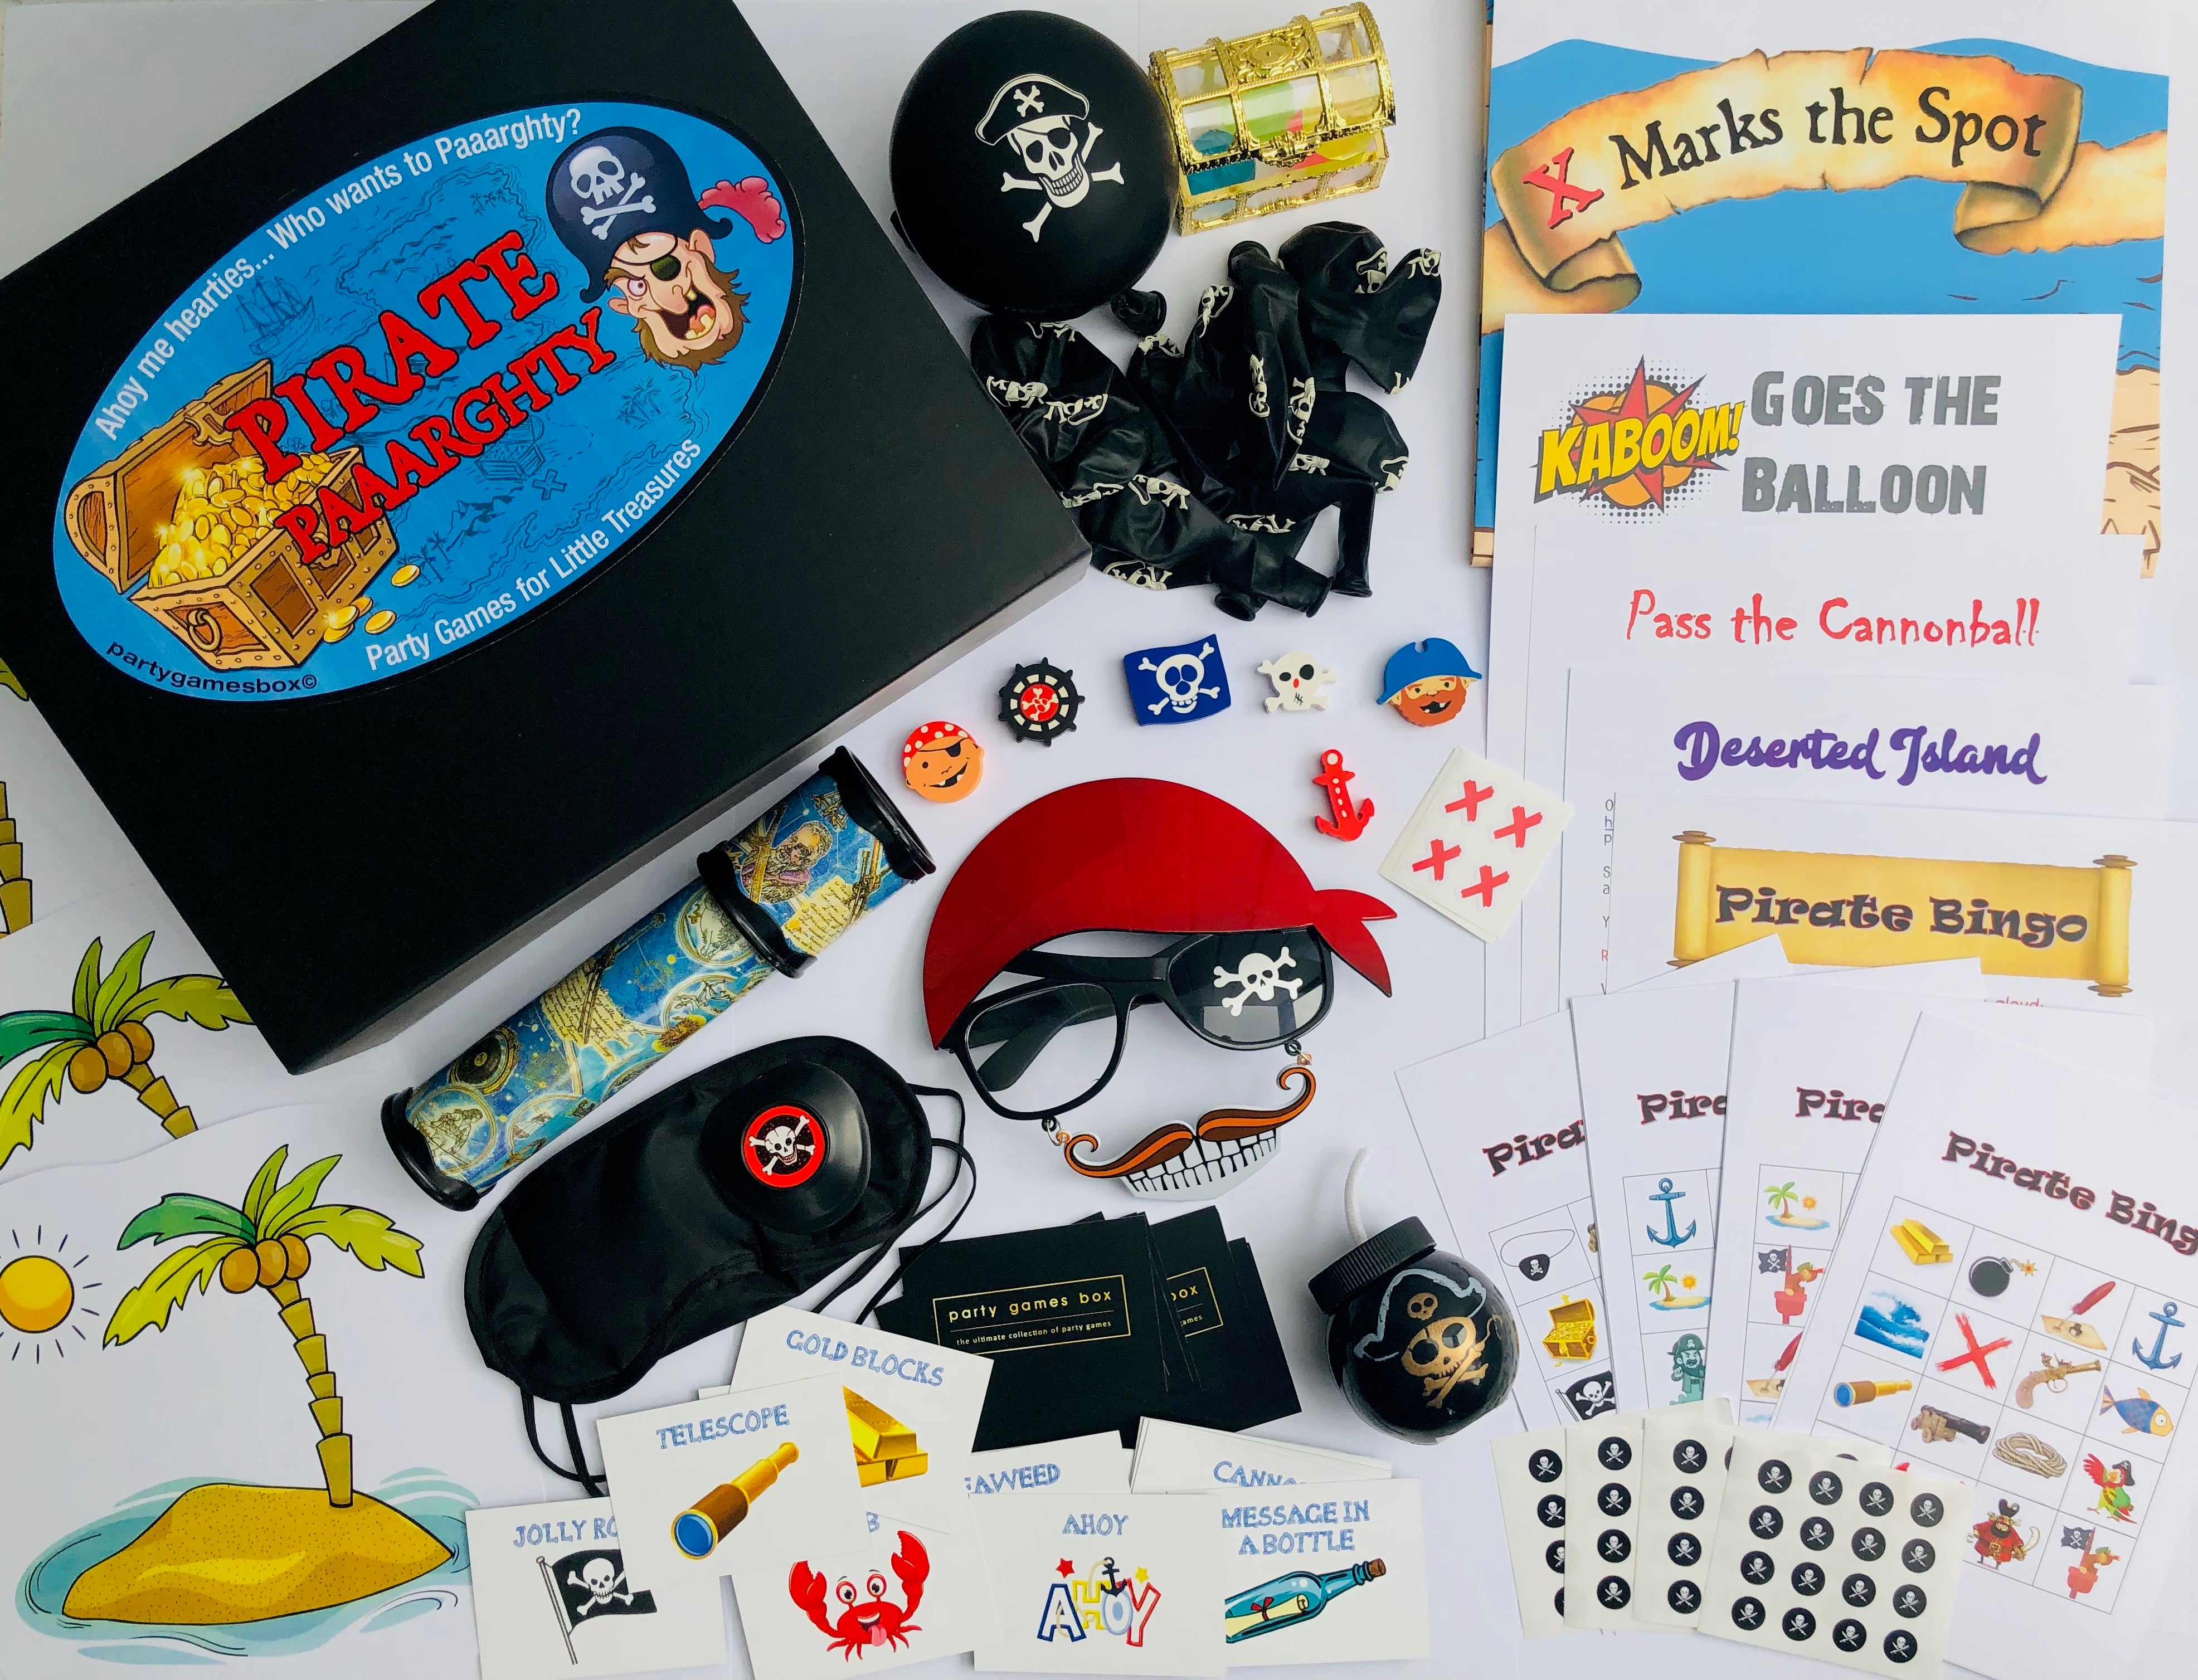 Pirate party games in a box